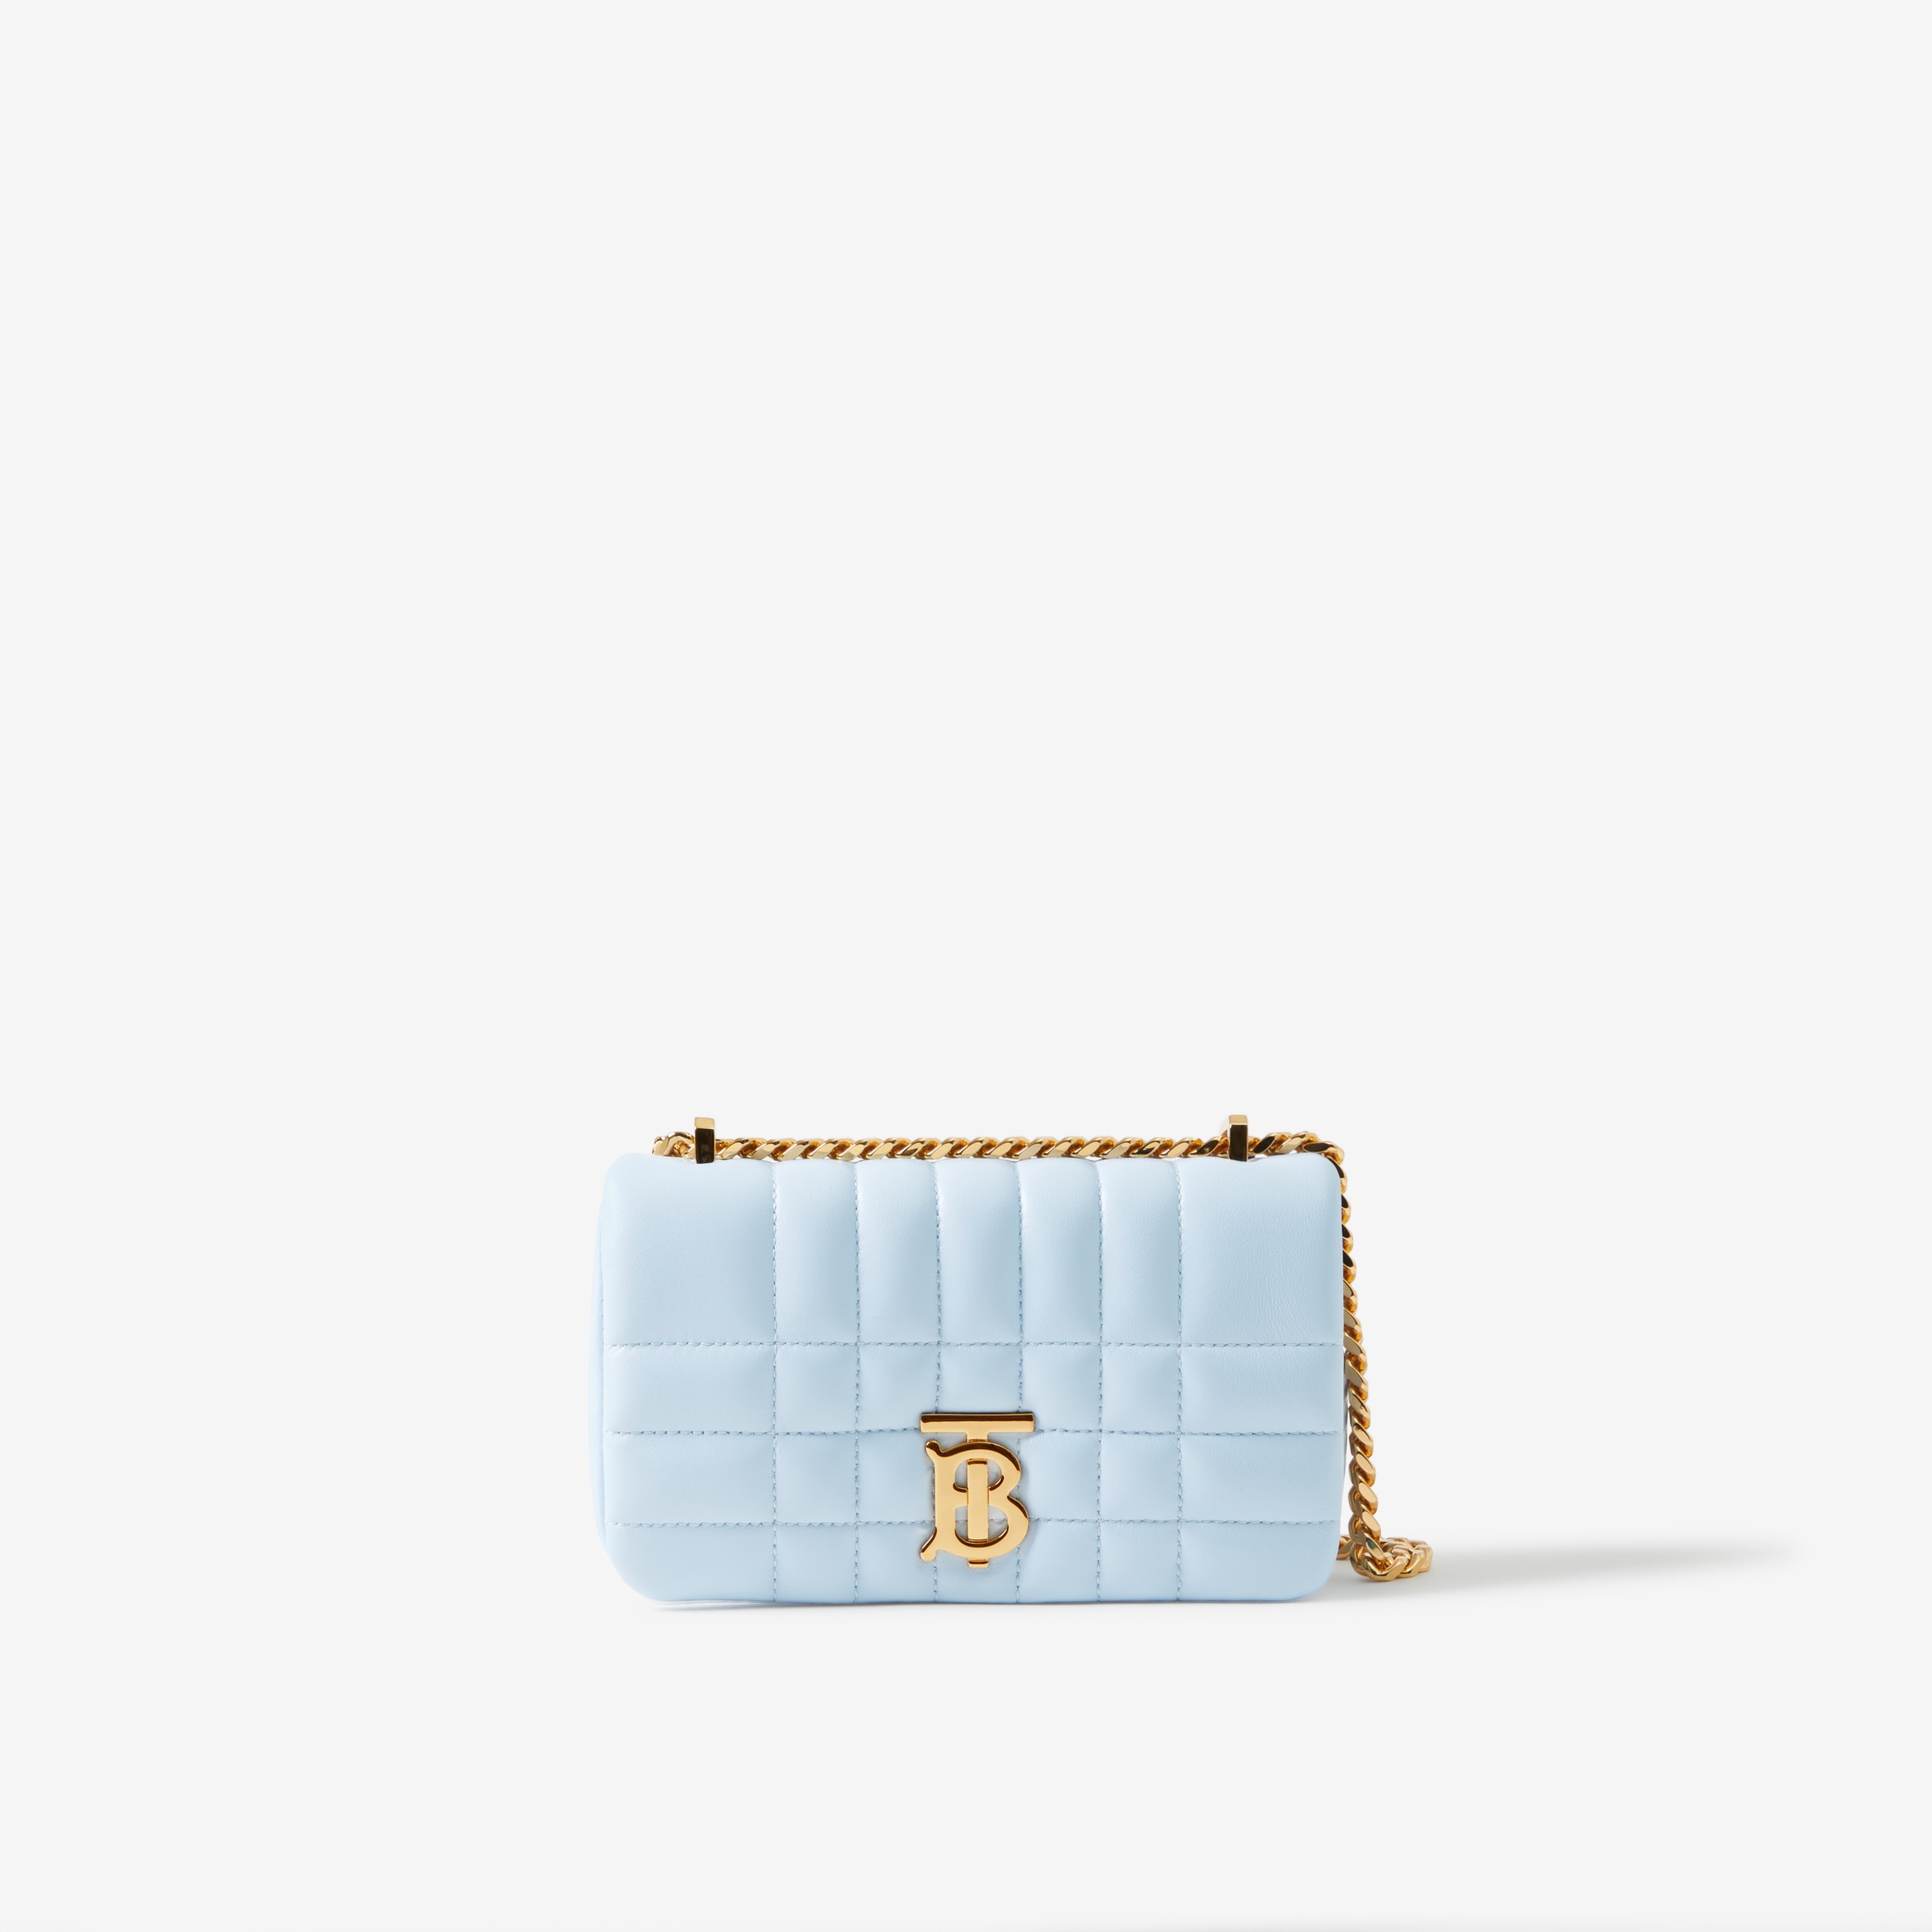 Mini Lola Bag in Pale Blue - Women | Burberry® Official